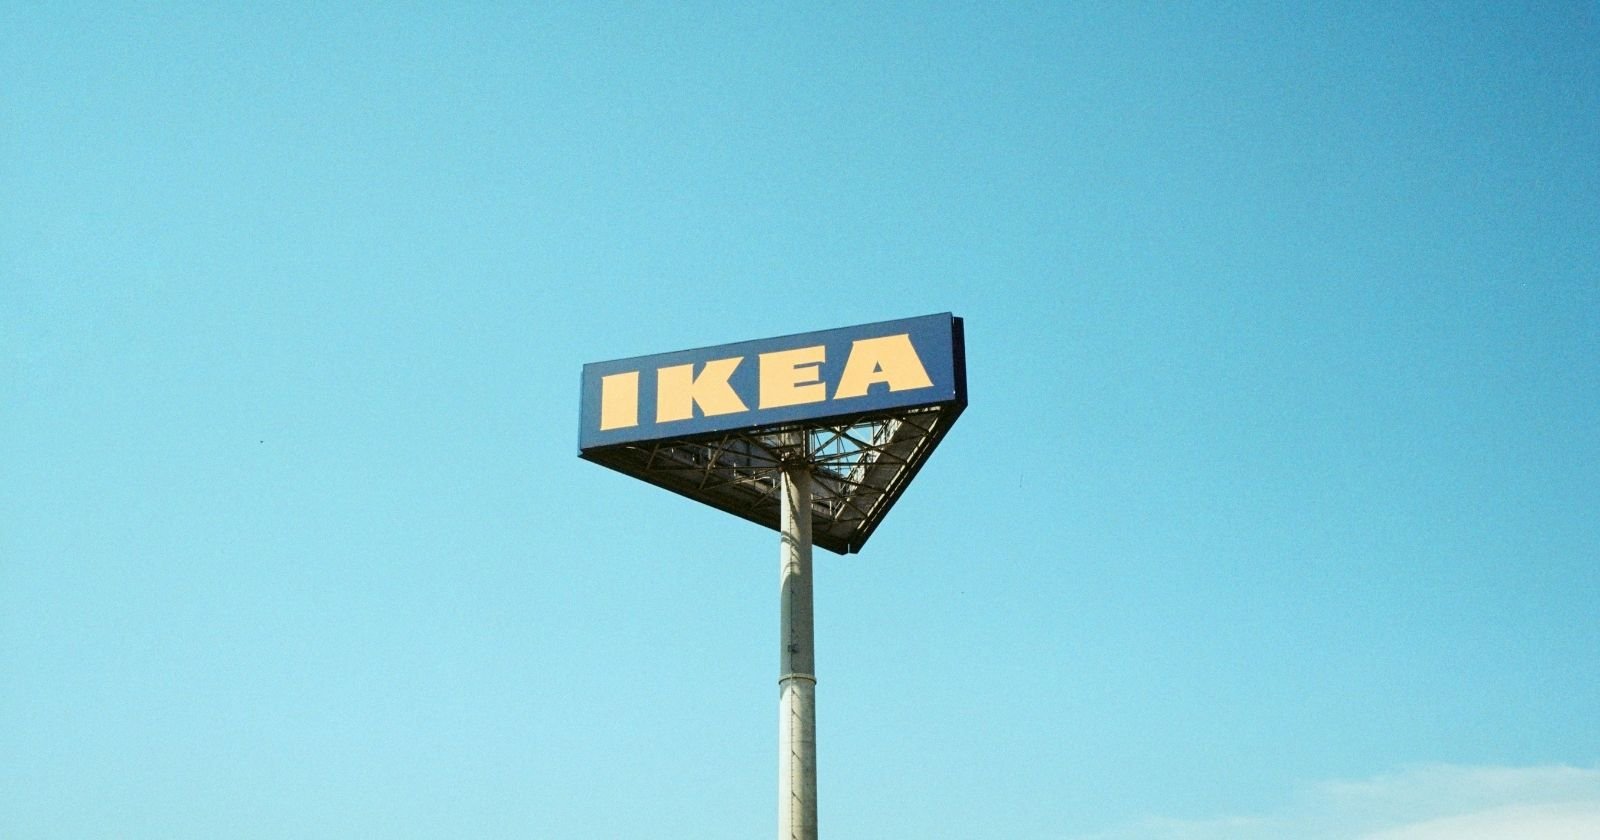 In the United States, IKEA continues its second-hand program